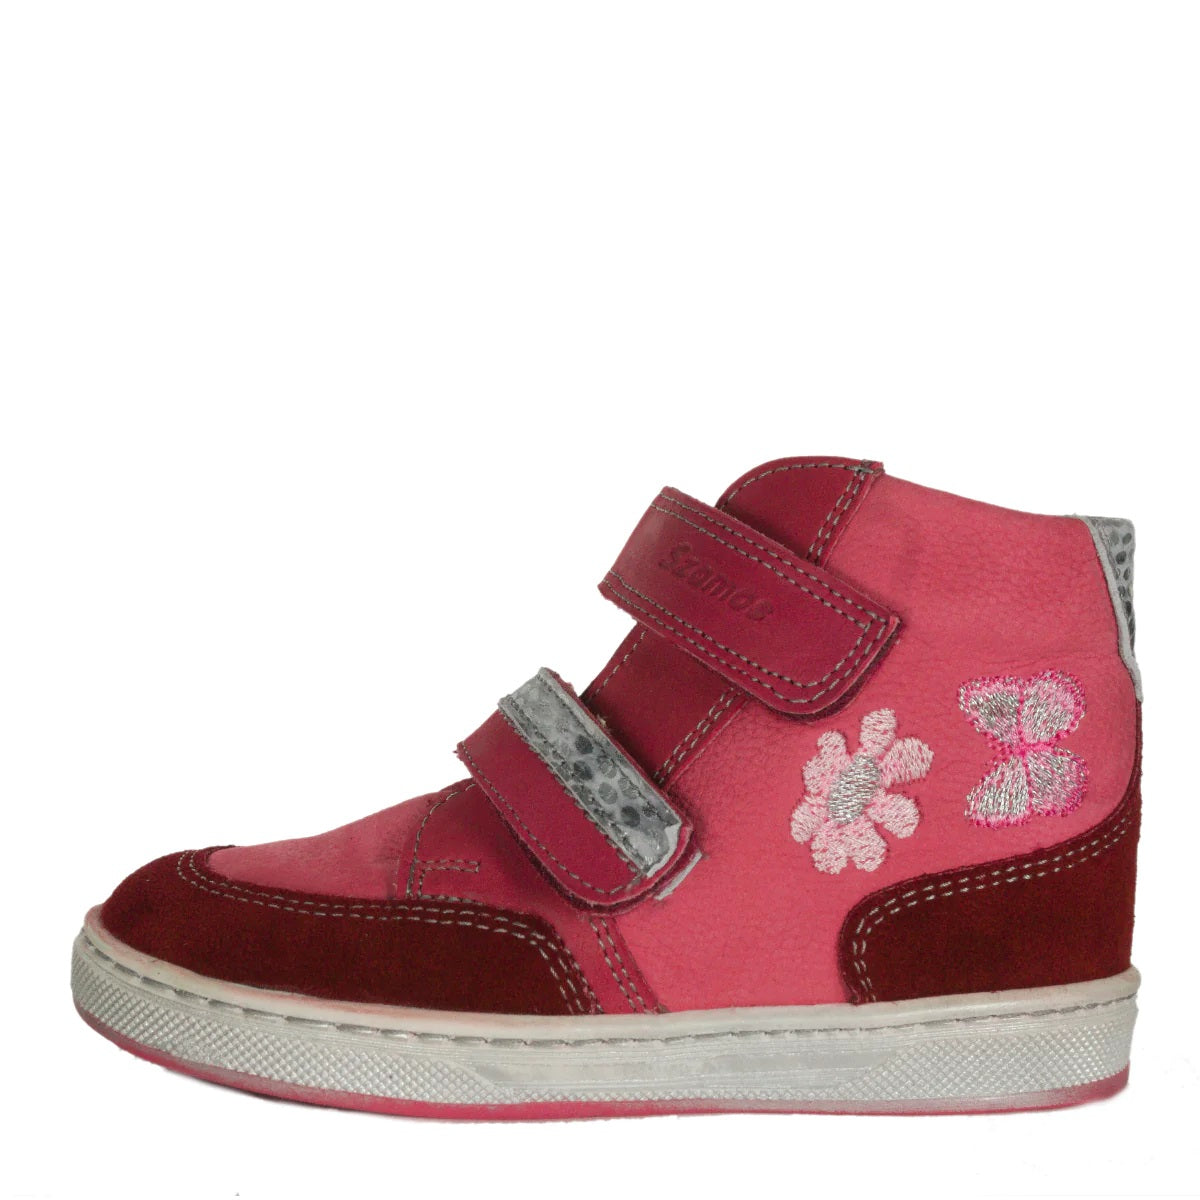 Szamos kid girl high-top shoes pink with red details and butterfly flower decor toddler/ little kid size